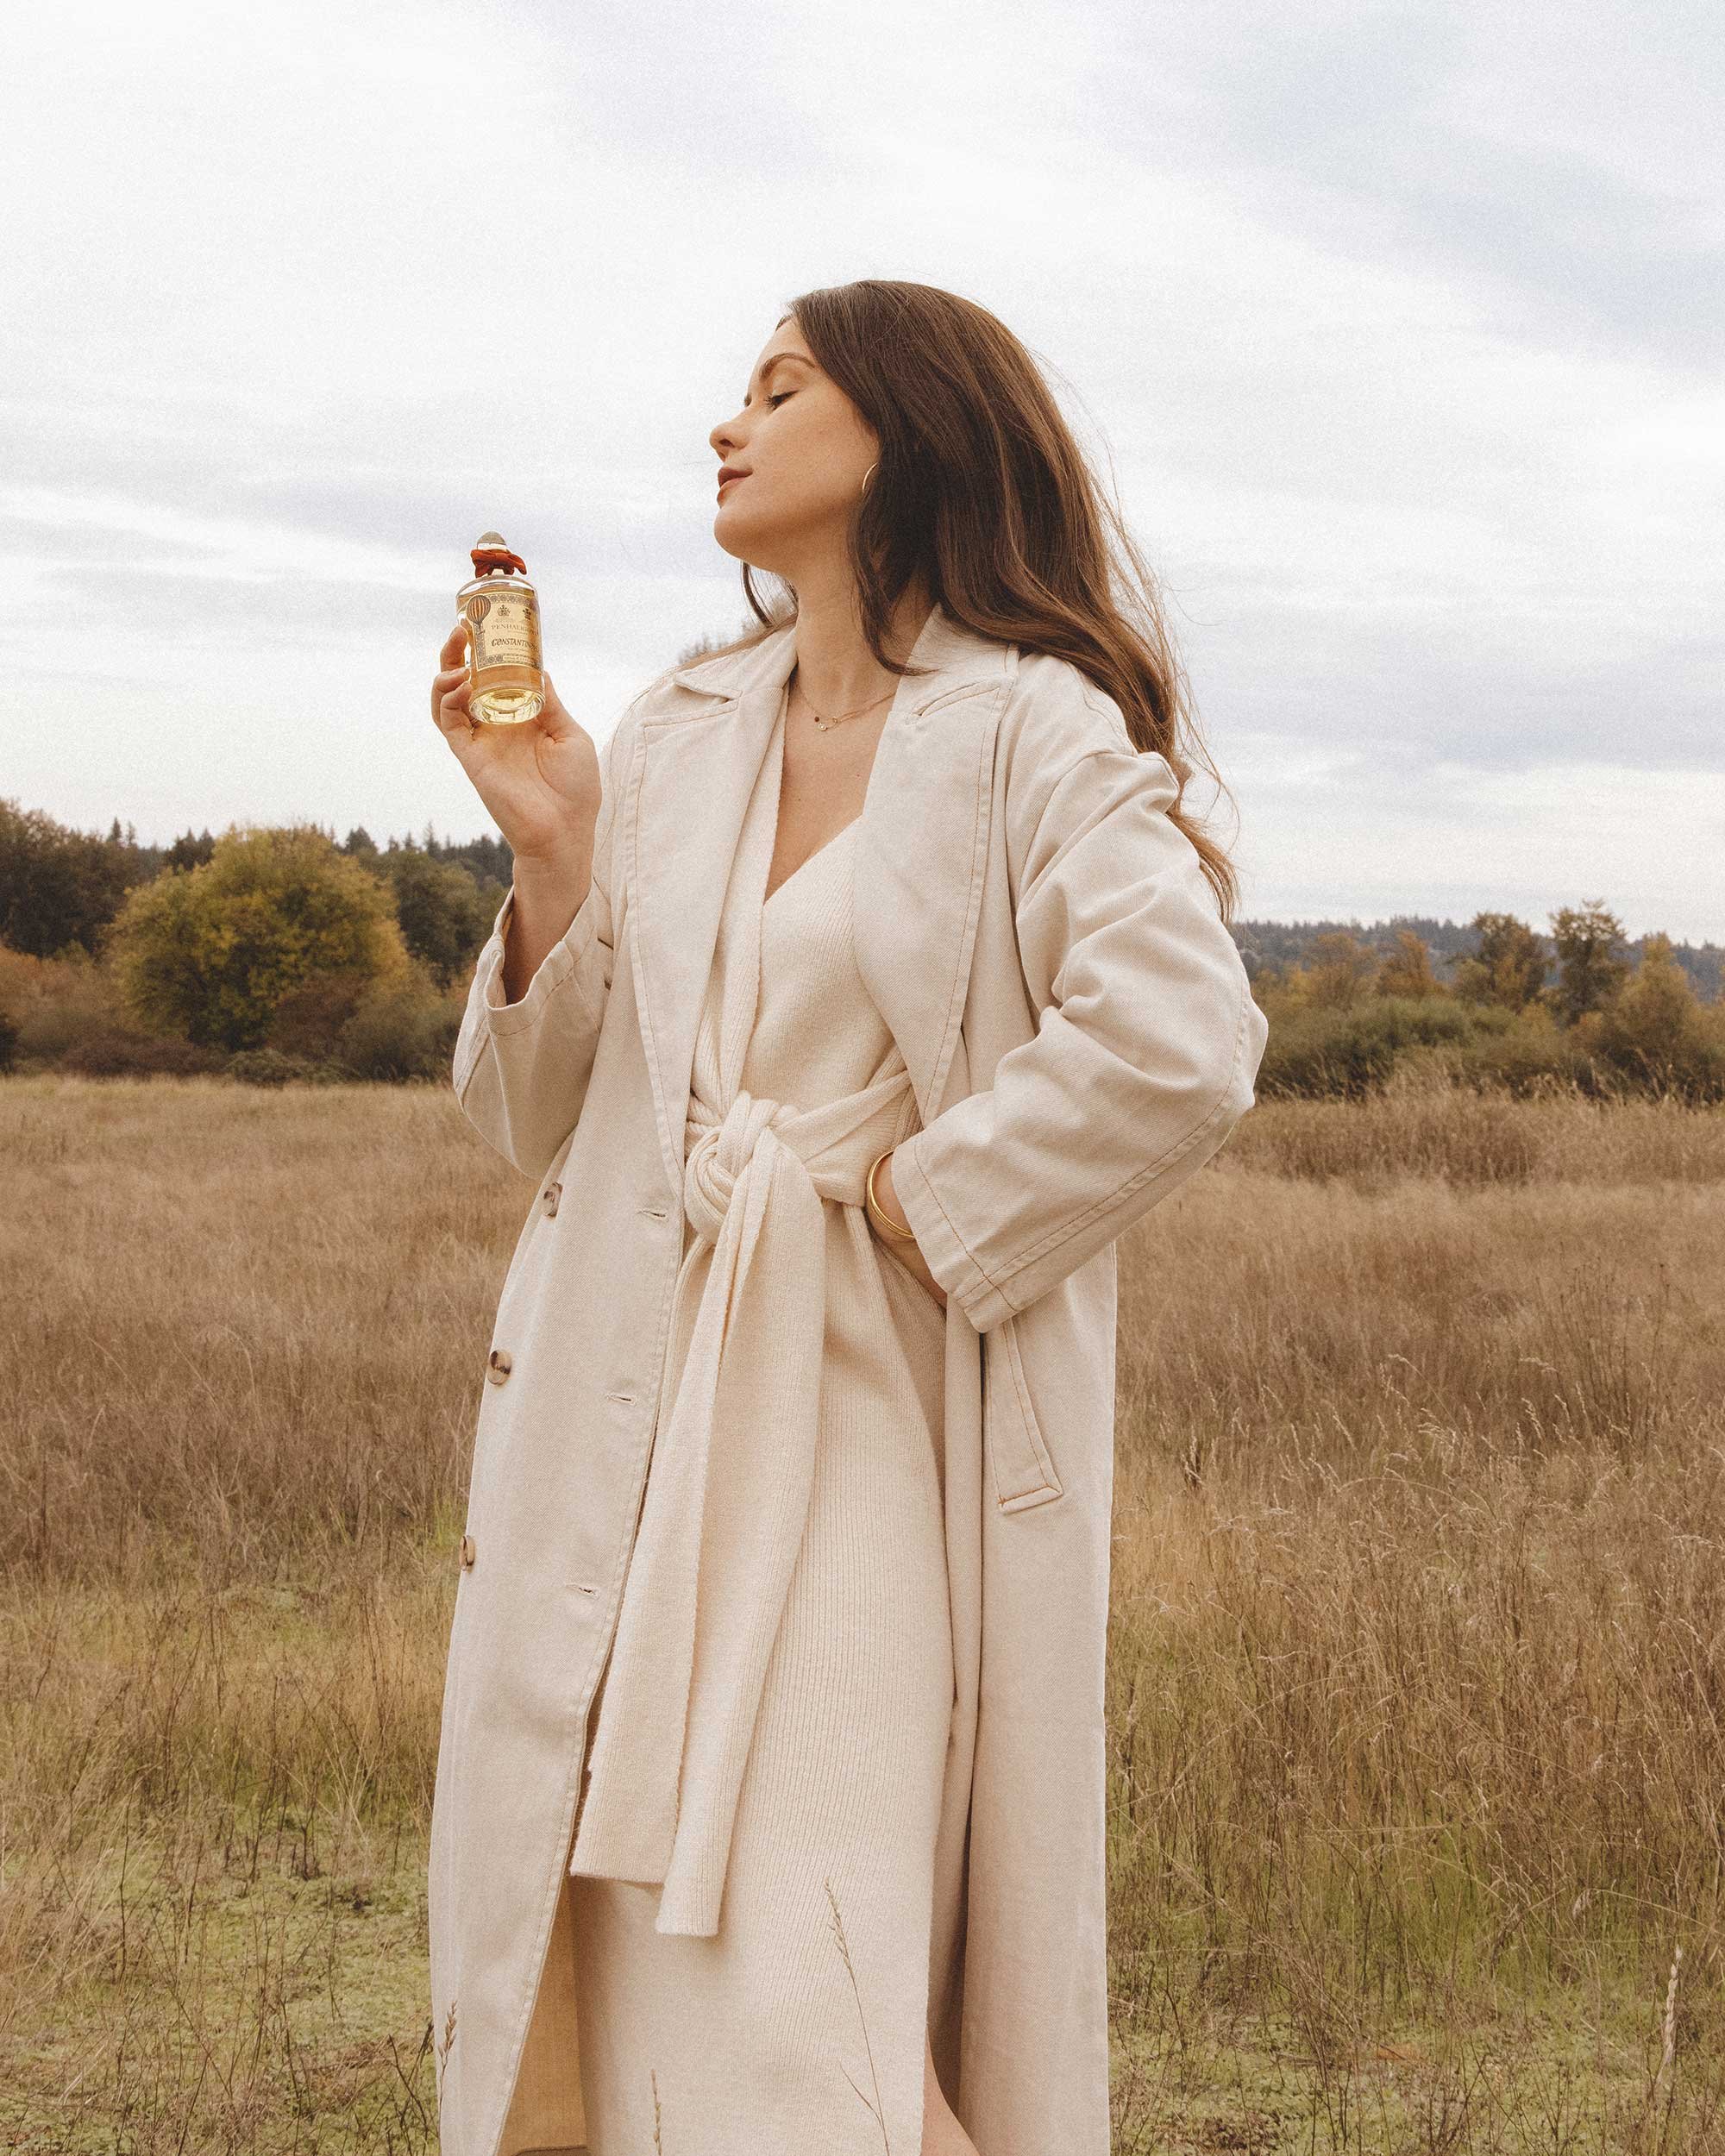 Neutral Fall Outfit Idea. Sarah Butler of @sarahchristine wearing Penhaligon Constantinople Eau De Parfum A fragrance created for the Queen of Cities, where elegant florals collide with warm, earthy aromas in Seattle, Washington. 4.jpg